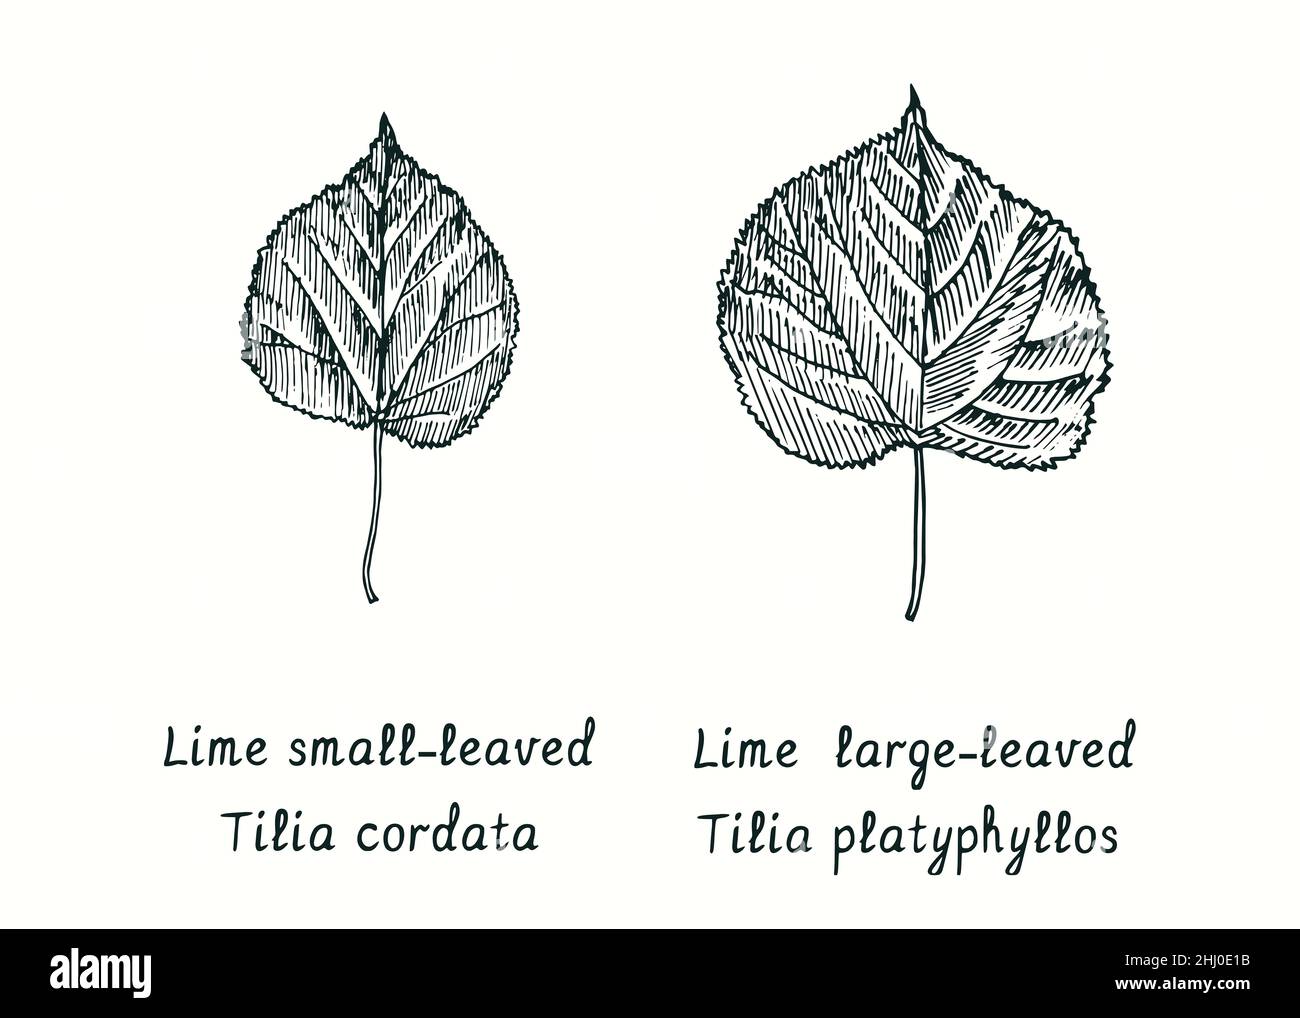 Lime small-leaved (Tilia cordata) leaf and Large-leaved Lime (Tilia platyphyllos) leaf. Ink black and white doodle drawing in woodcut style. Drawing Stock Photo